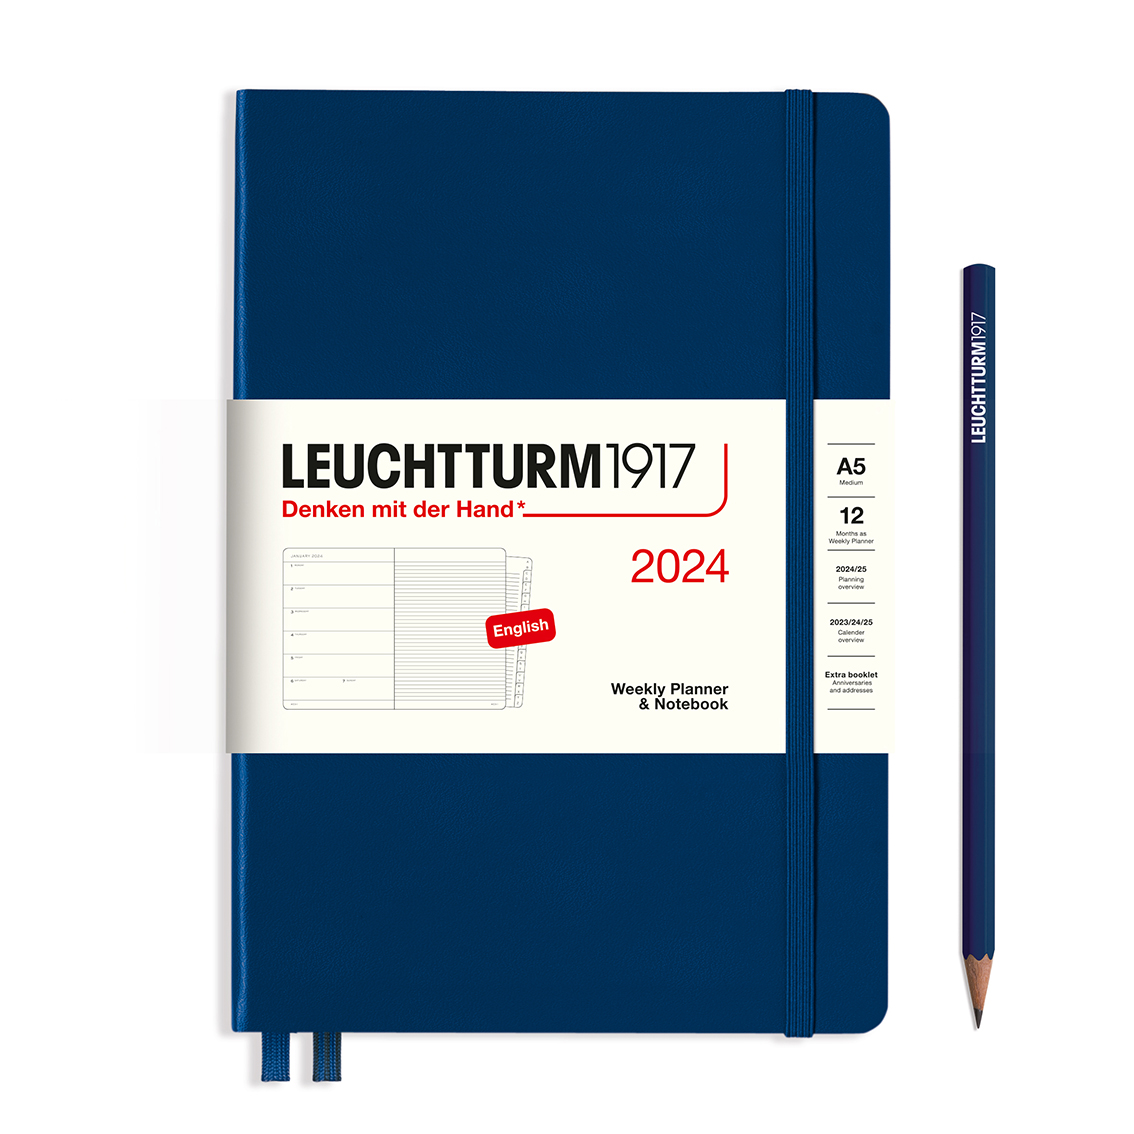 Weekly Planner & Notebook Medium (A5) 2024, with booklet, Navy, English